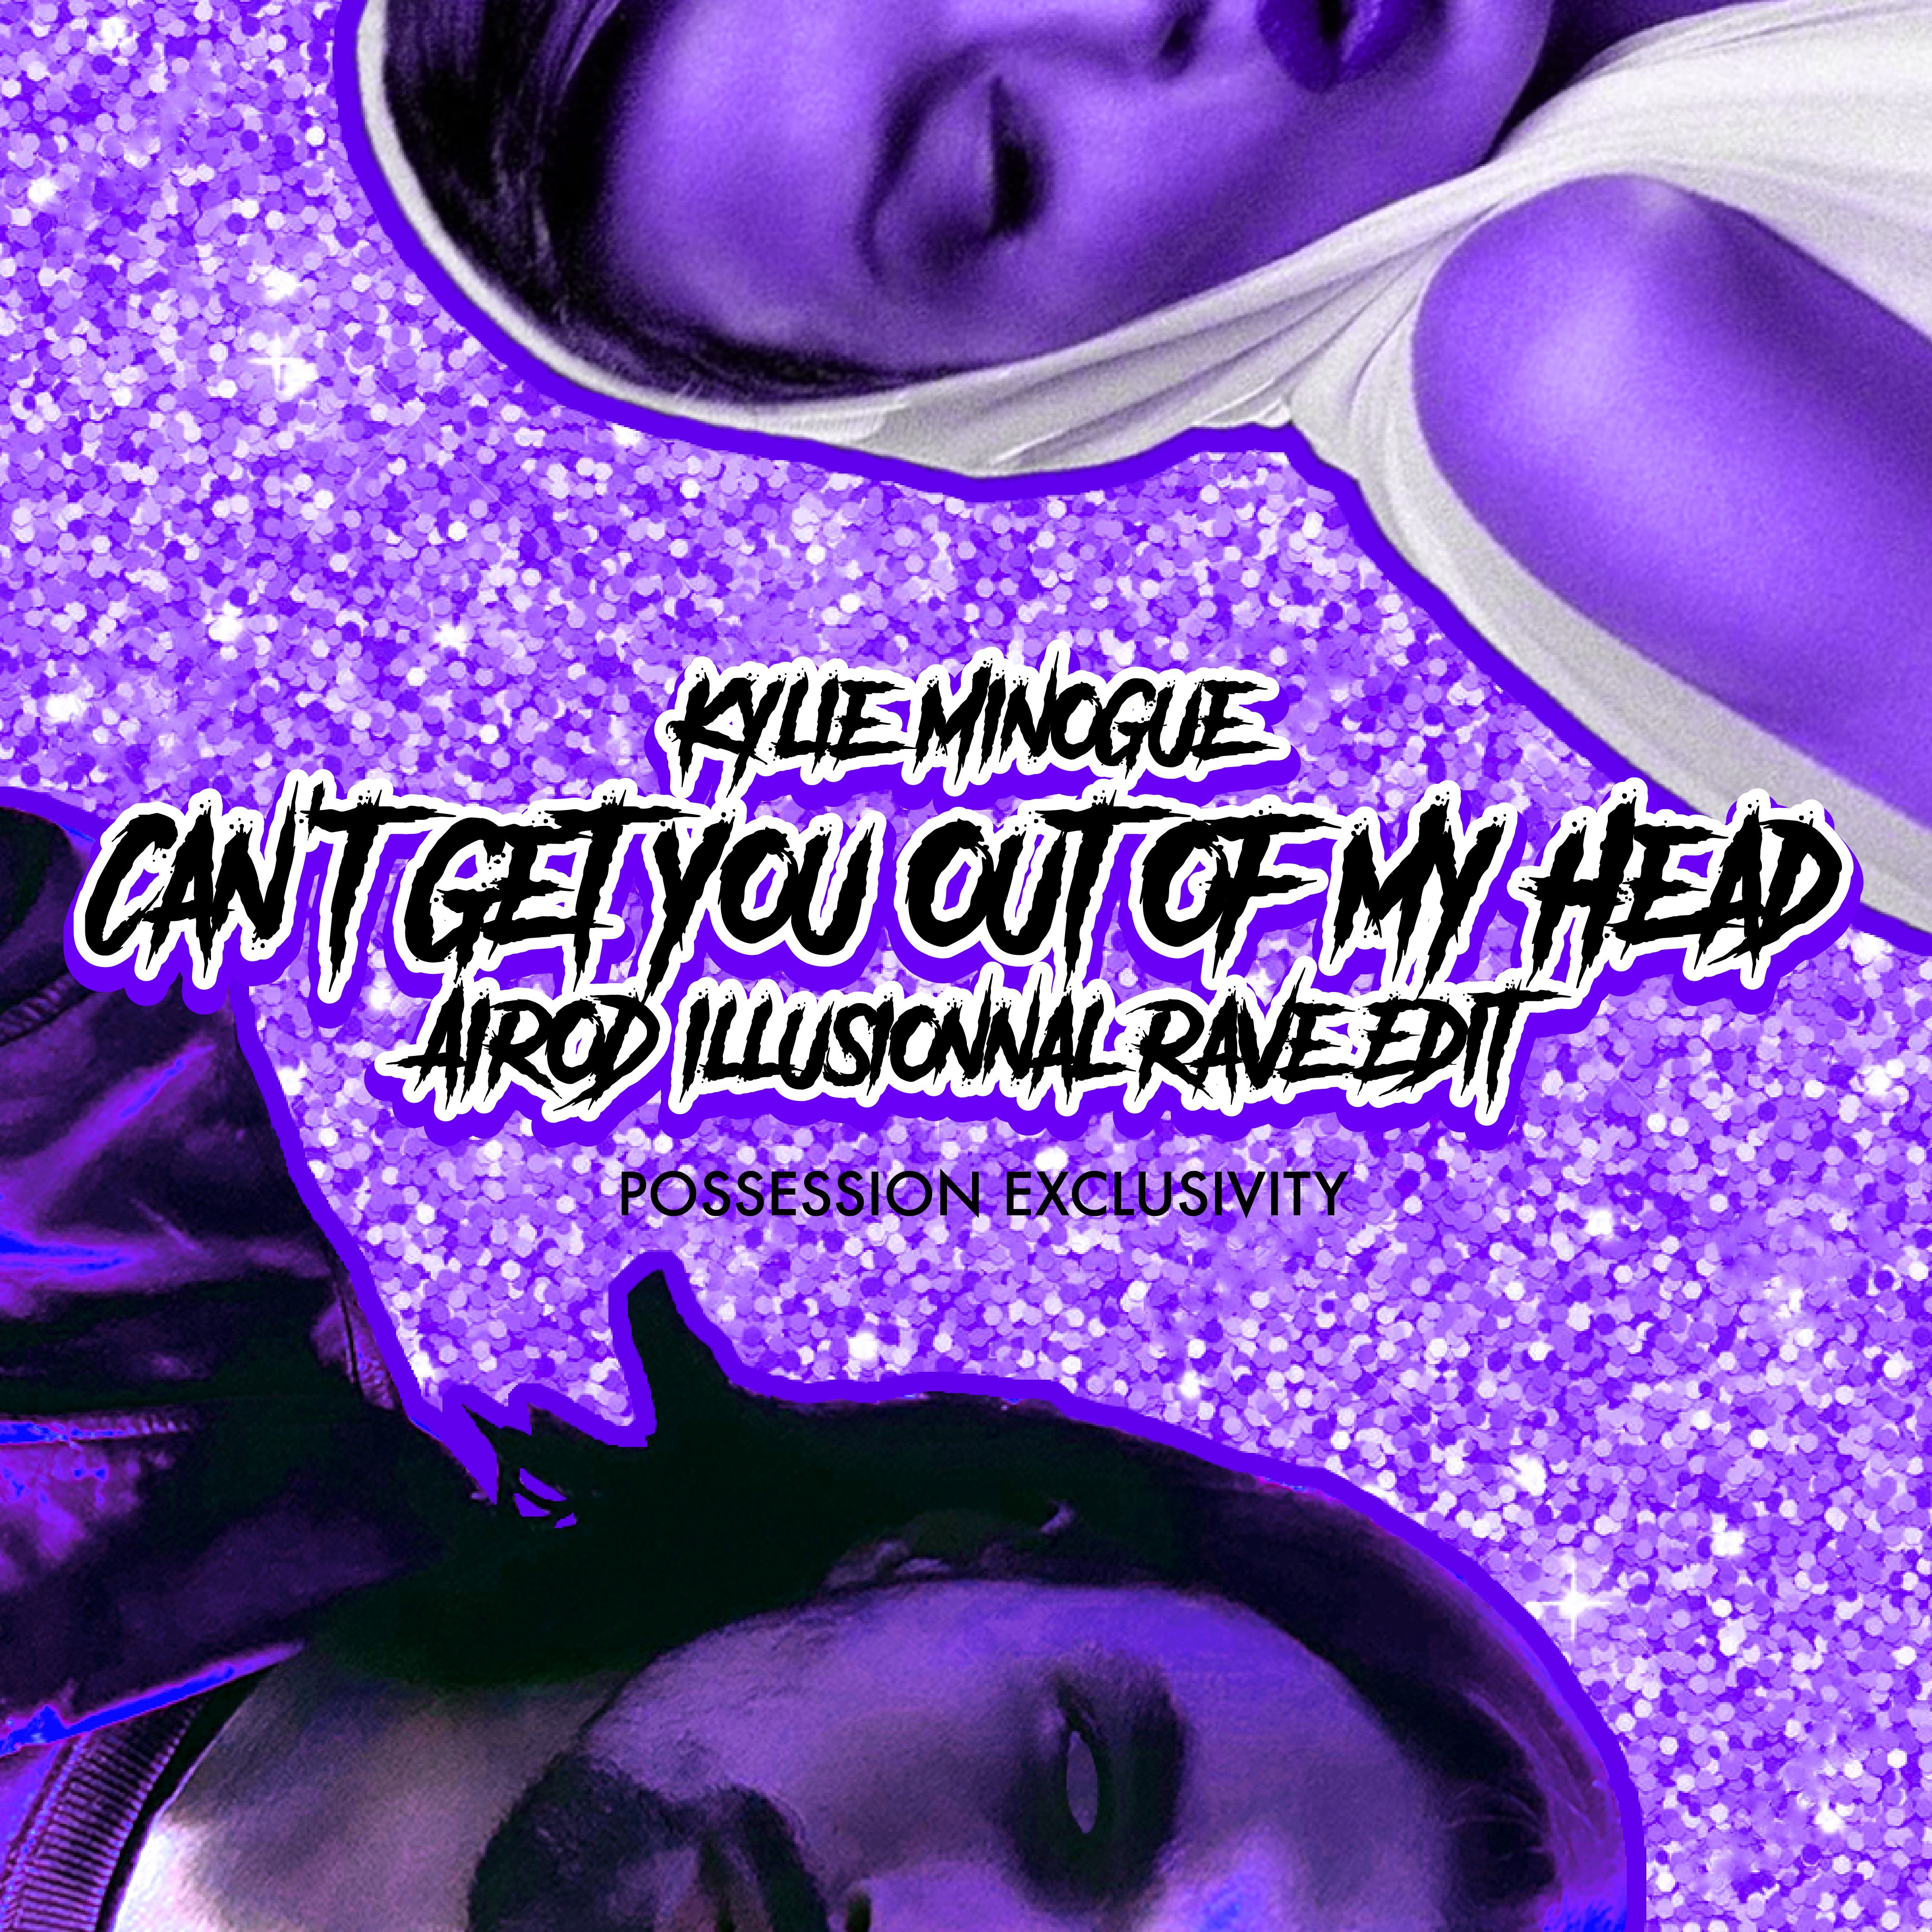 Кэт дженис dance you outta my head. Kylie Minogue can`t get you out. Kylie Minogue tears on my Pillow. Kylie Minogue can't get you out of my head. Hard Techno Rave.